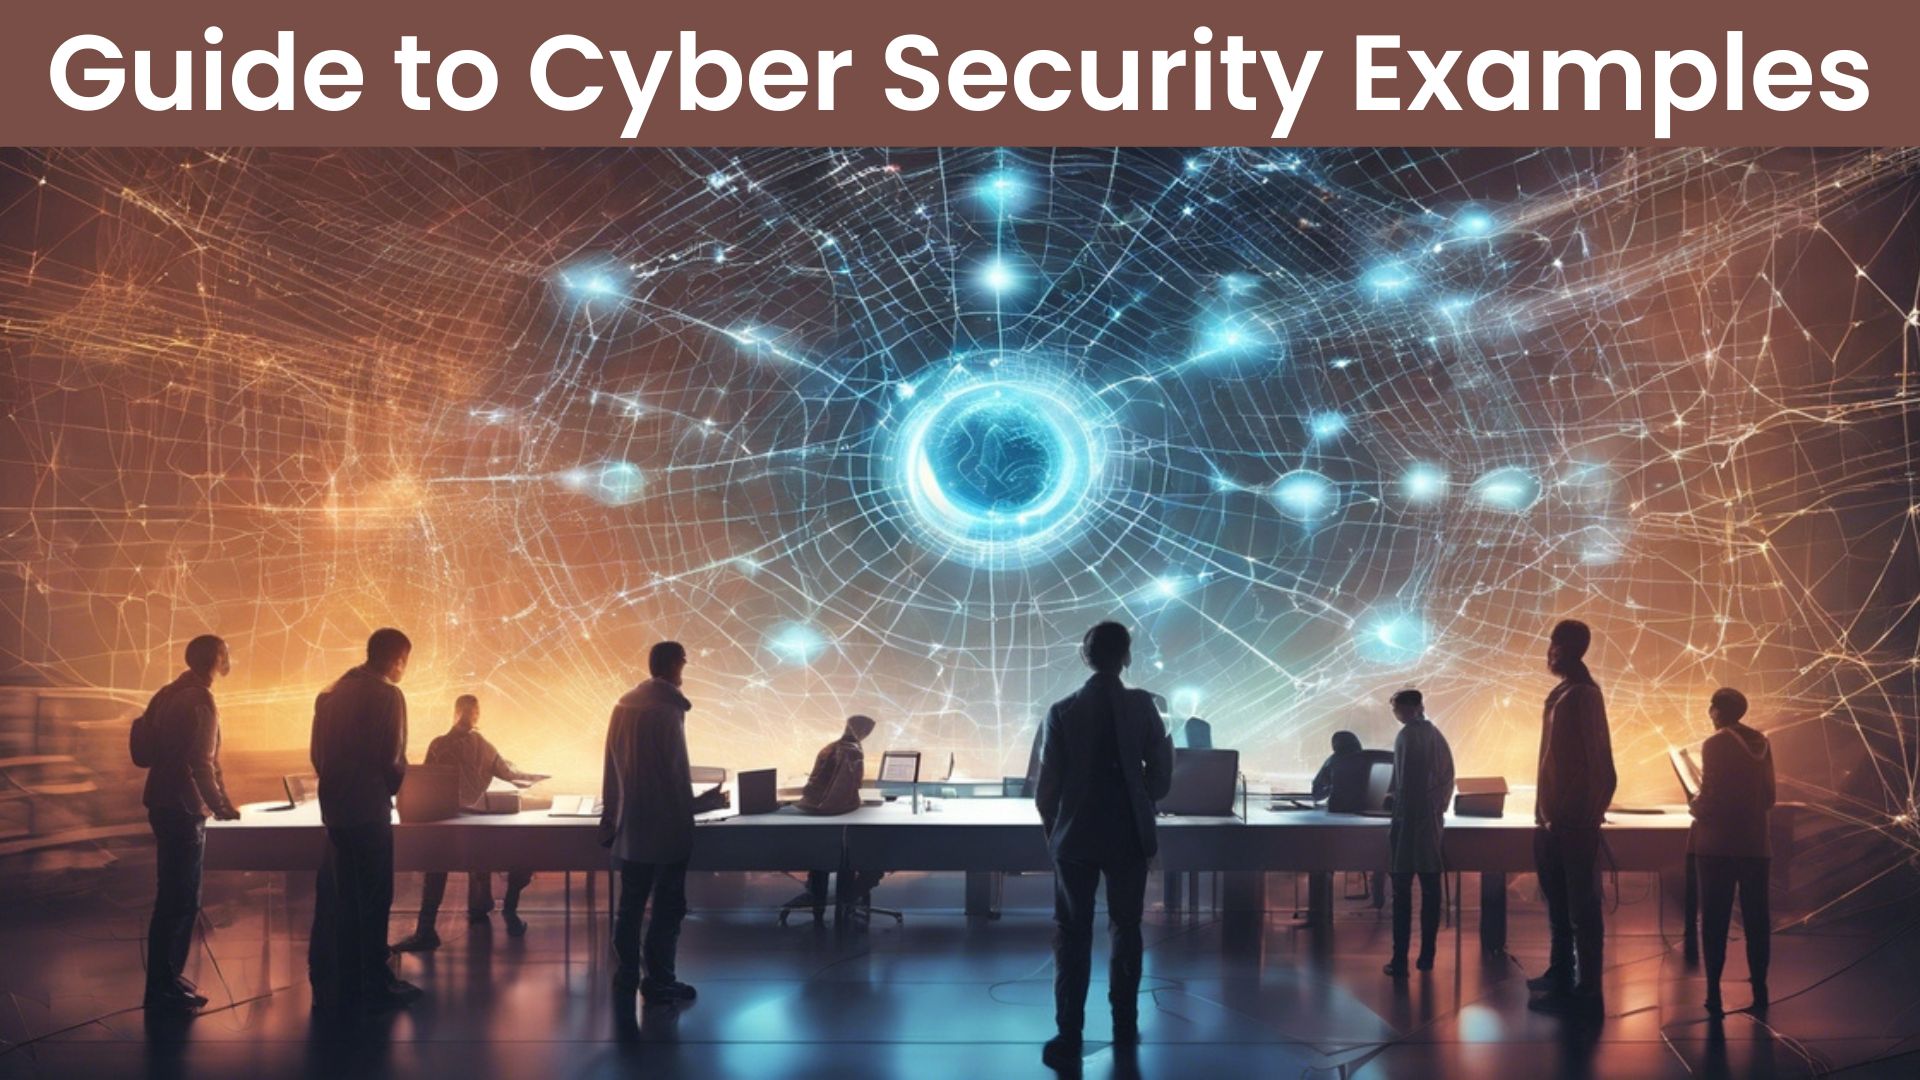 Common Cyber Security Threats, Cyber Security Best Practices, Cyber Security Resources Guide, Guide to Cybersecurity Tools